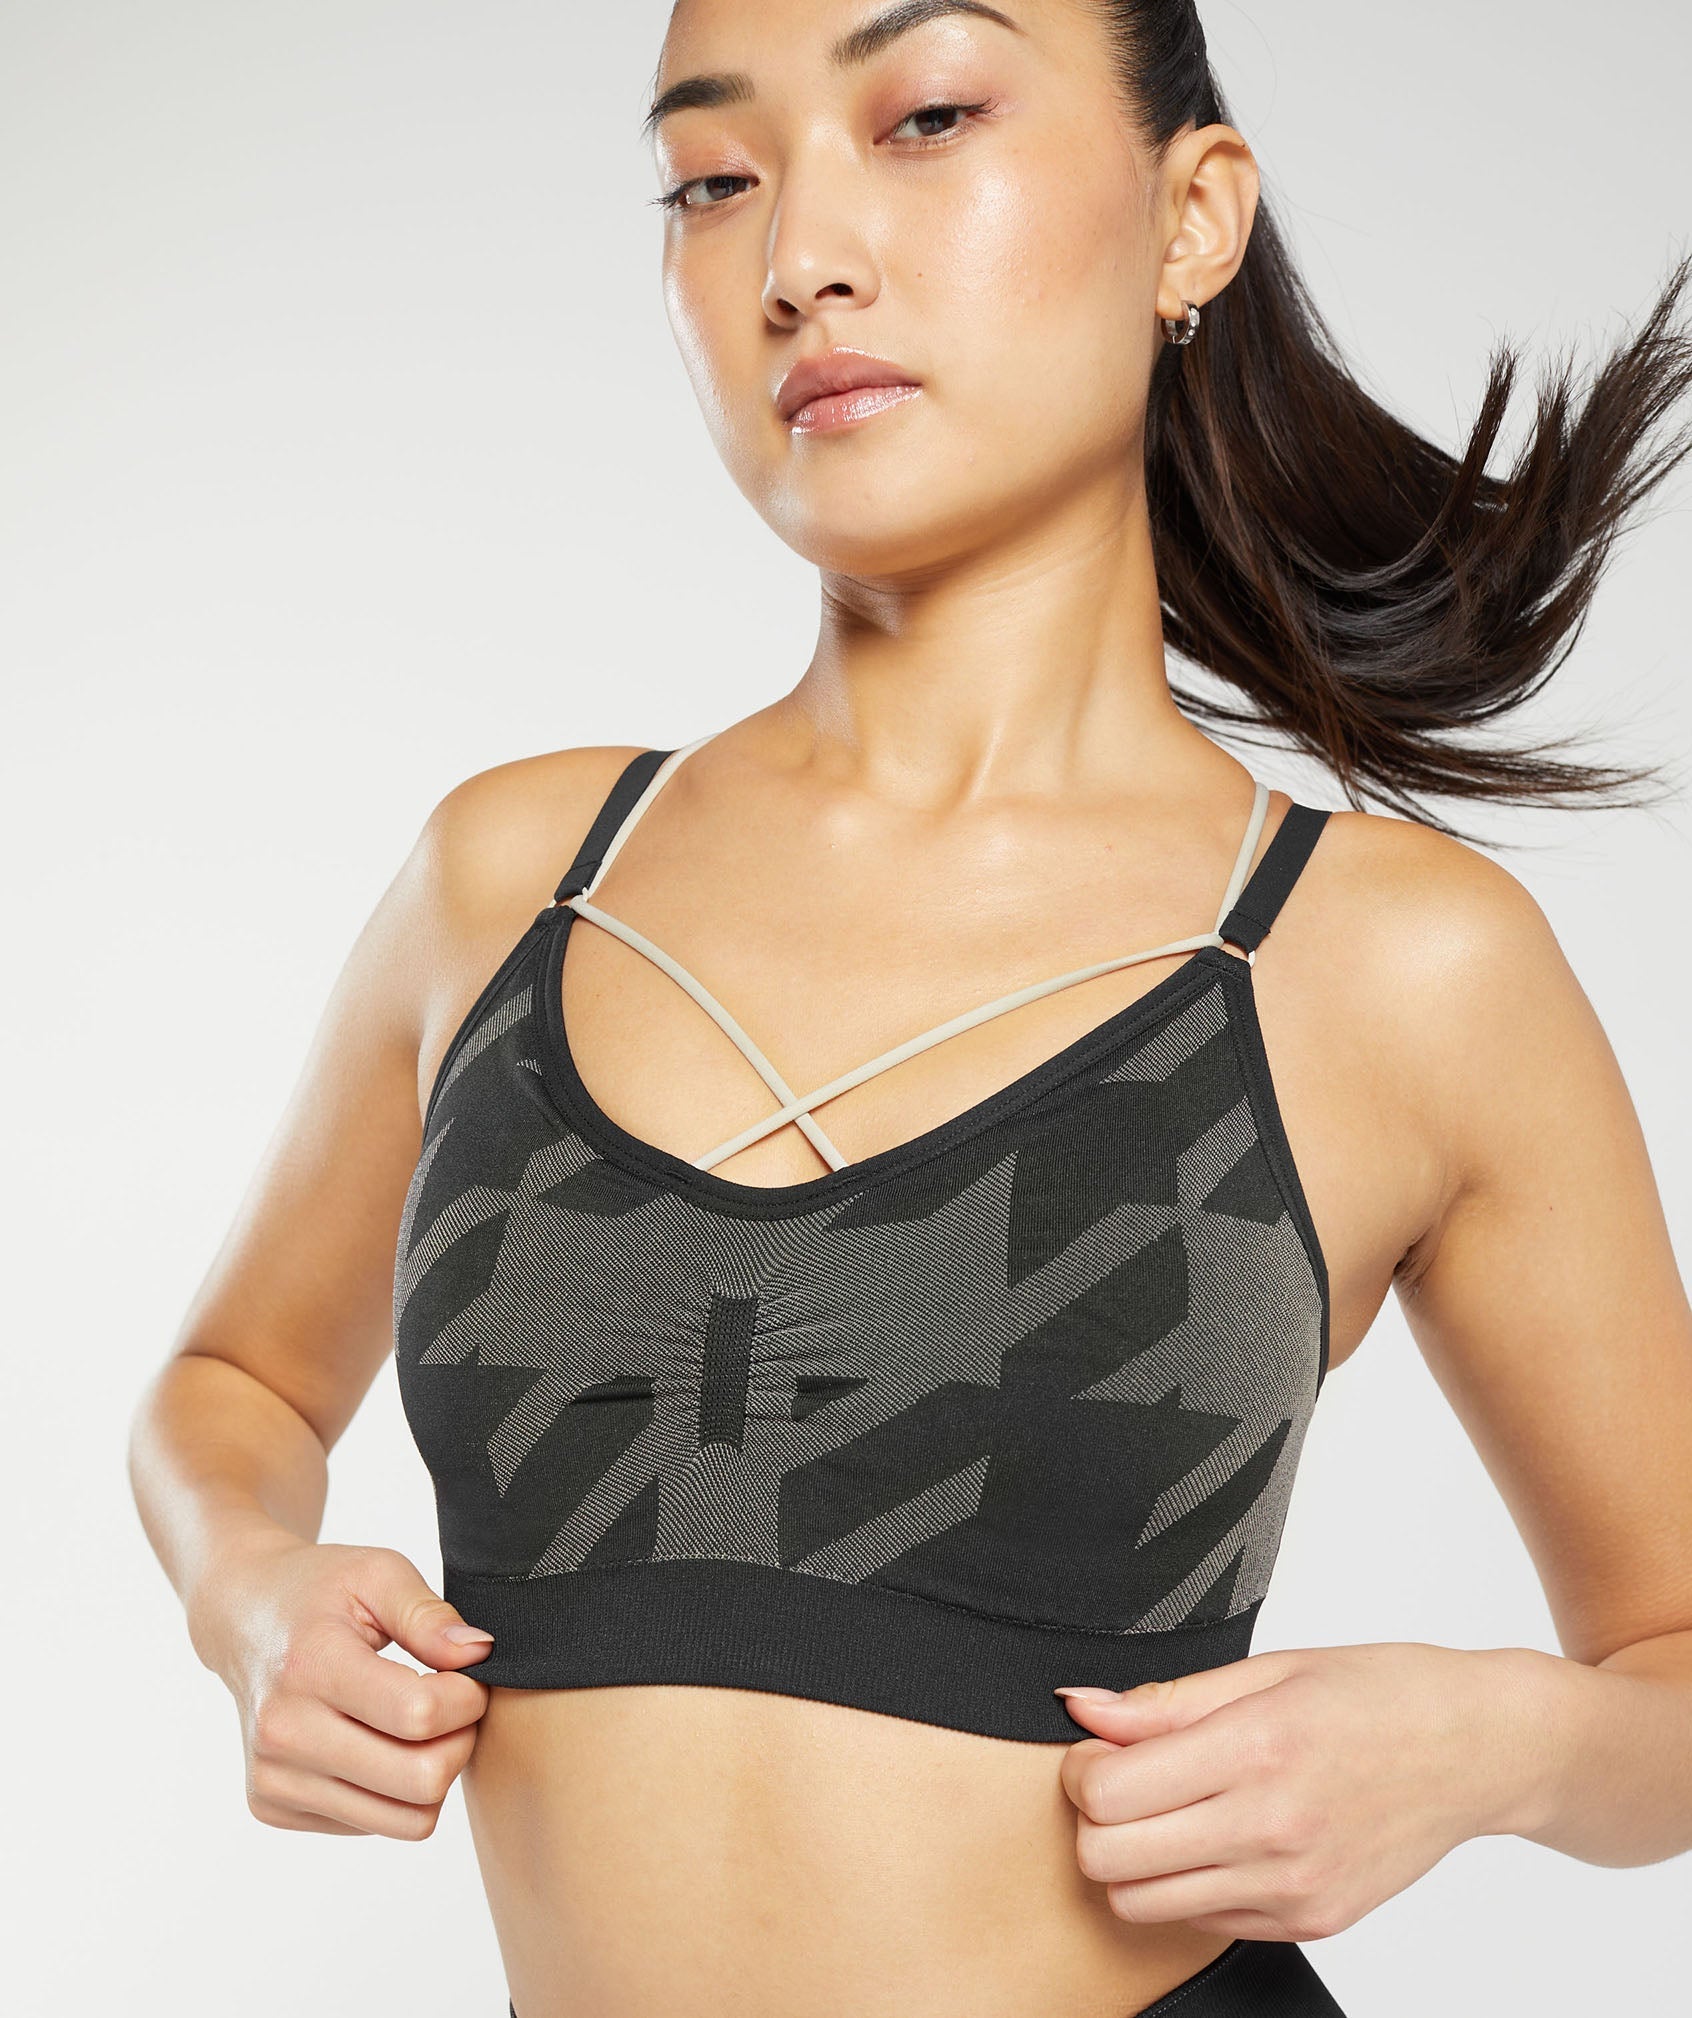 Apex Limit Seamless Ruched Sports Bra in Black/Washed Stone Brown - view 10